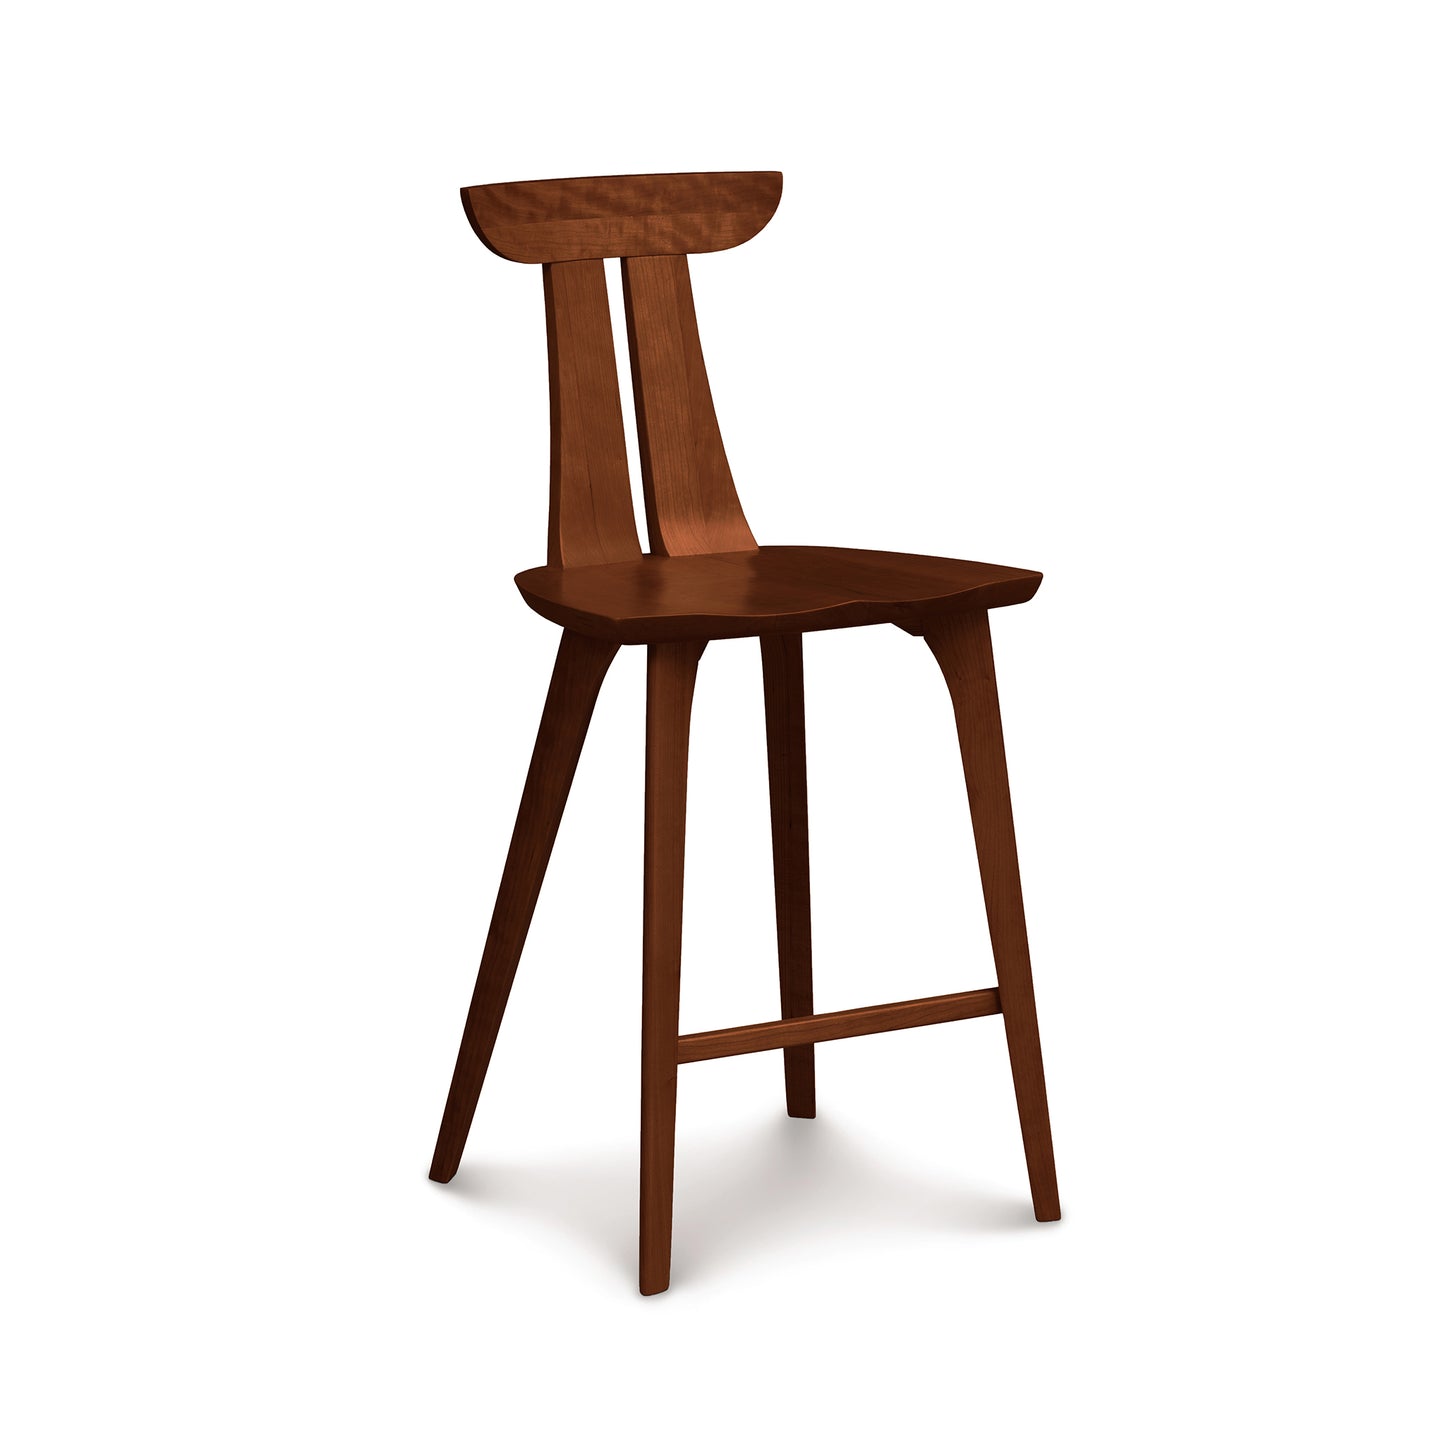 A Copeland Furniture Estelle Counter Stool isolated on a white background.